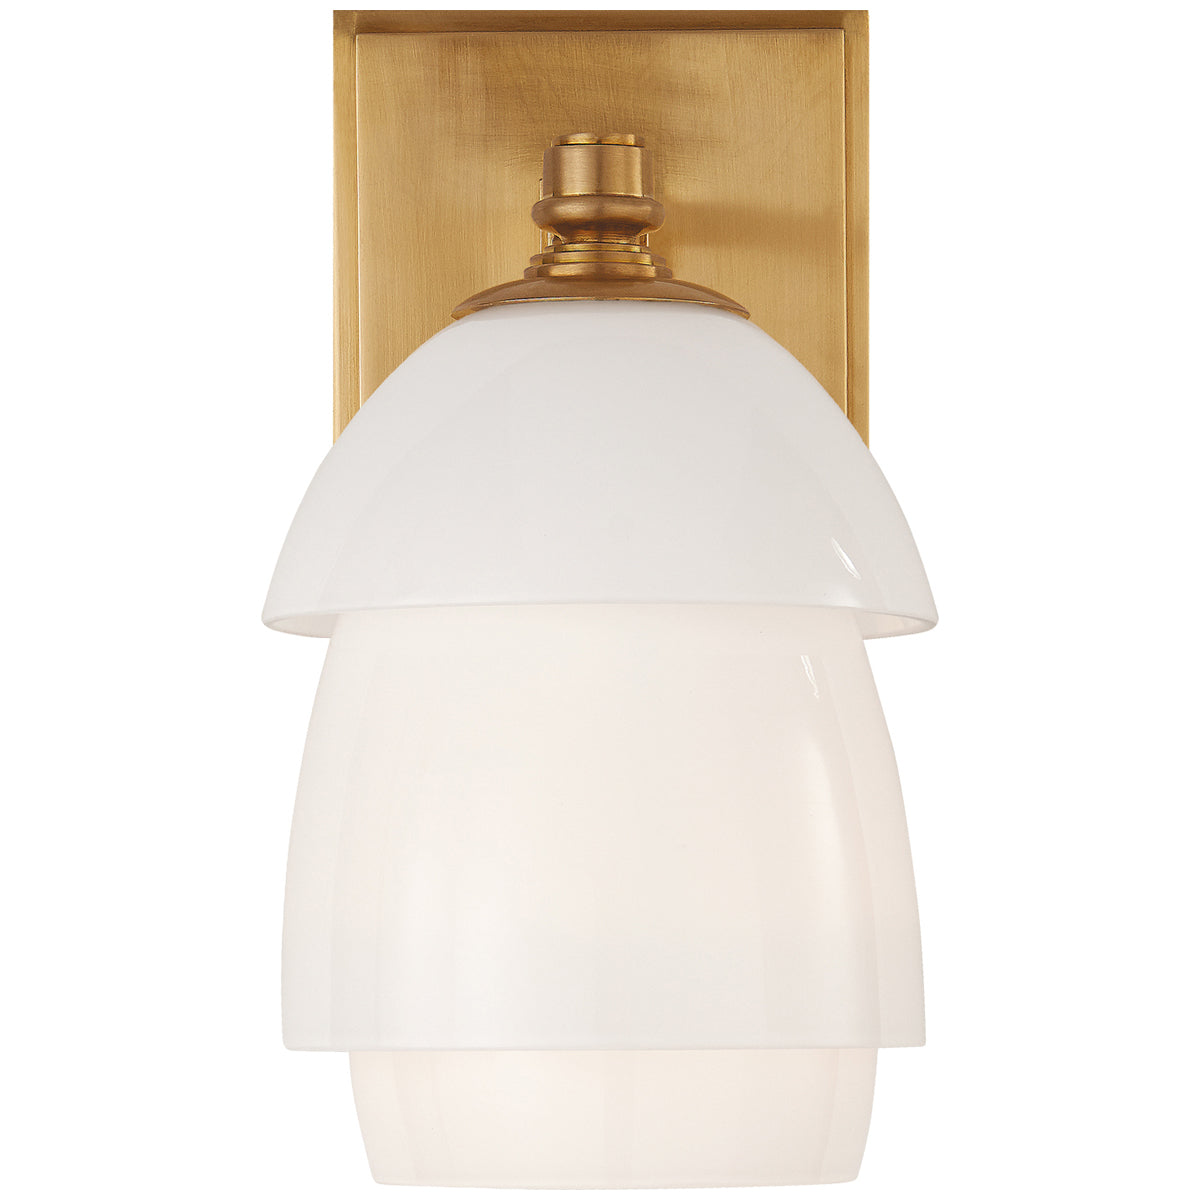 Visual Comfort Whitman Small Sconce with White Glass Shade